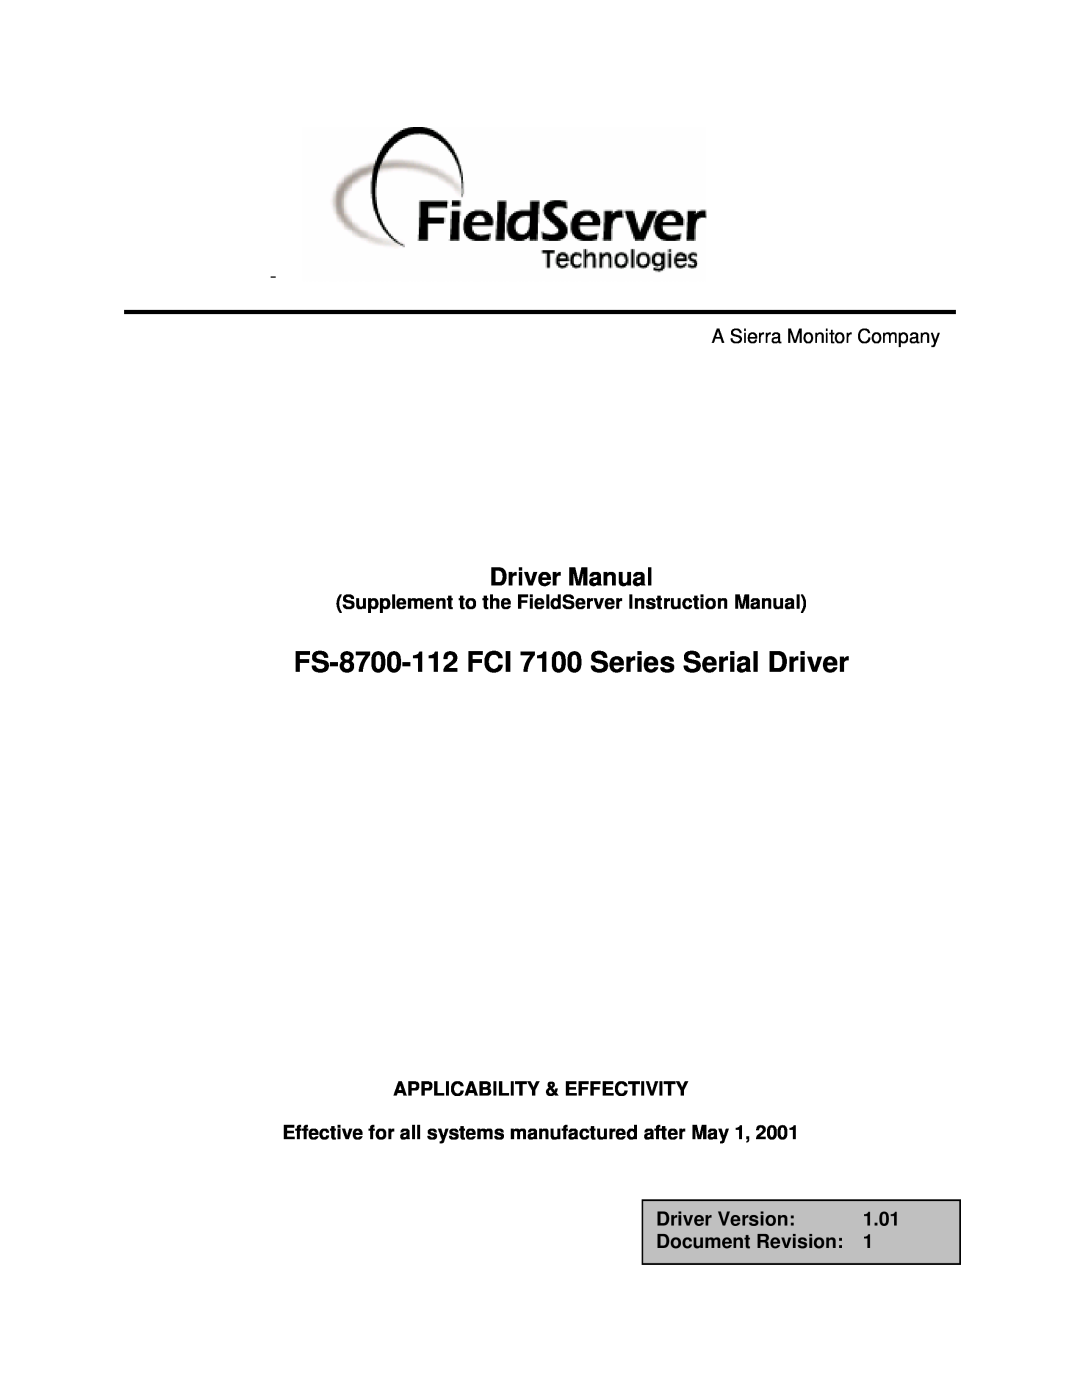 FieldServer instruction manual FS-8700-112 FCI 7100 Series Serial Driver, Applicability & Effectivity, Driver Version 